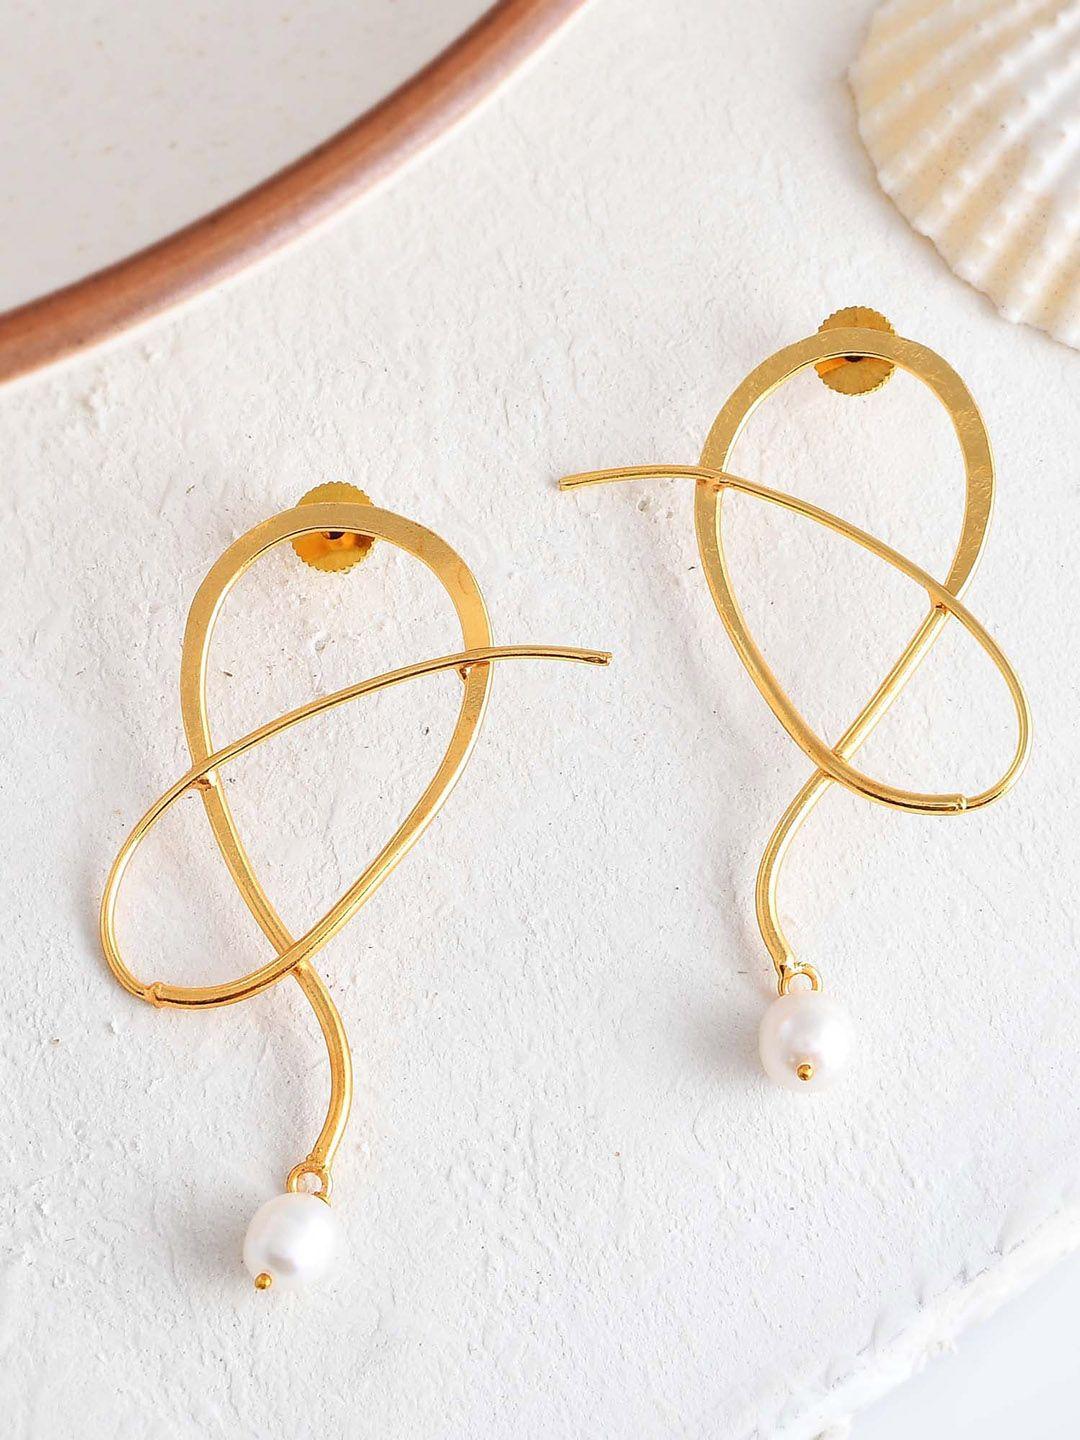 zurii beads detail contemporary drop earrings